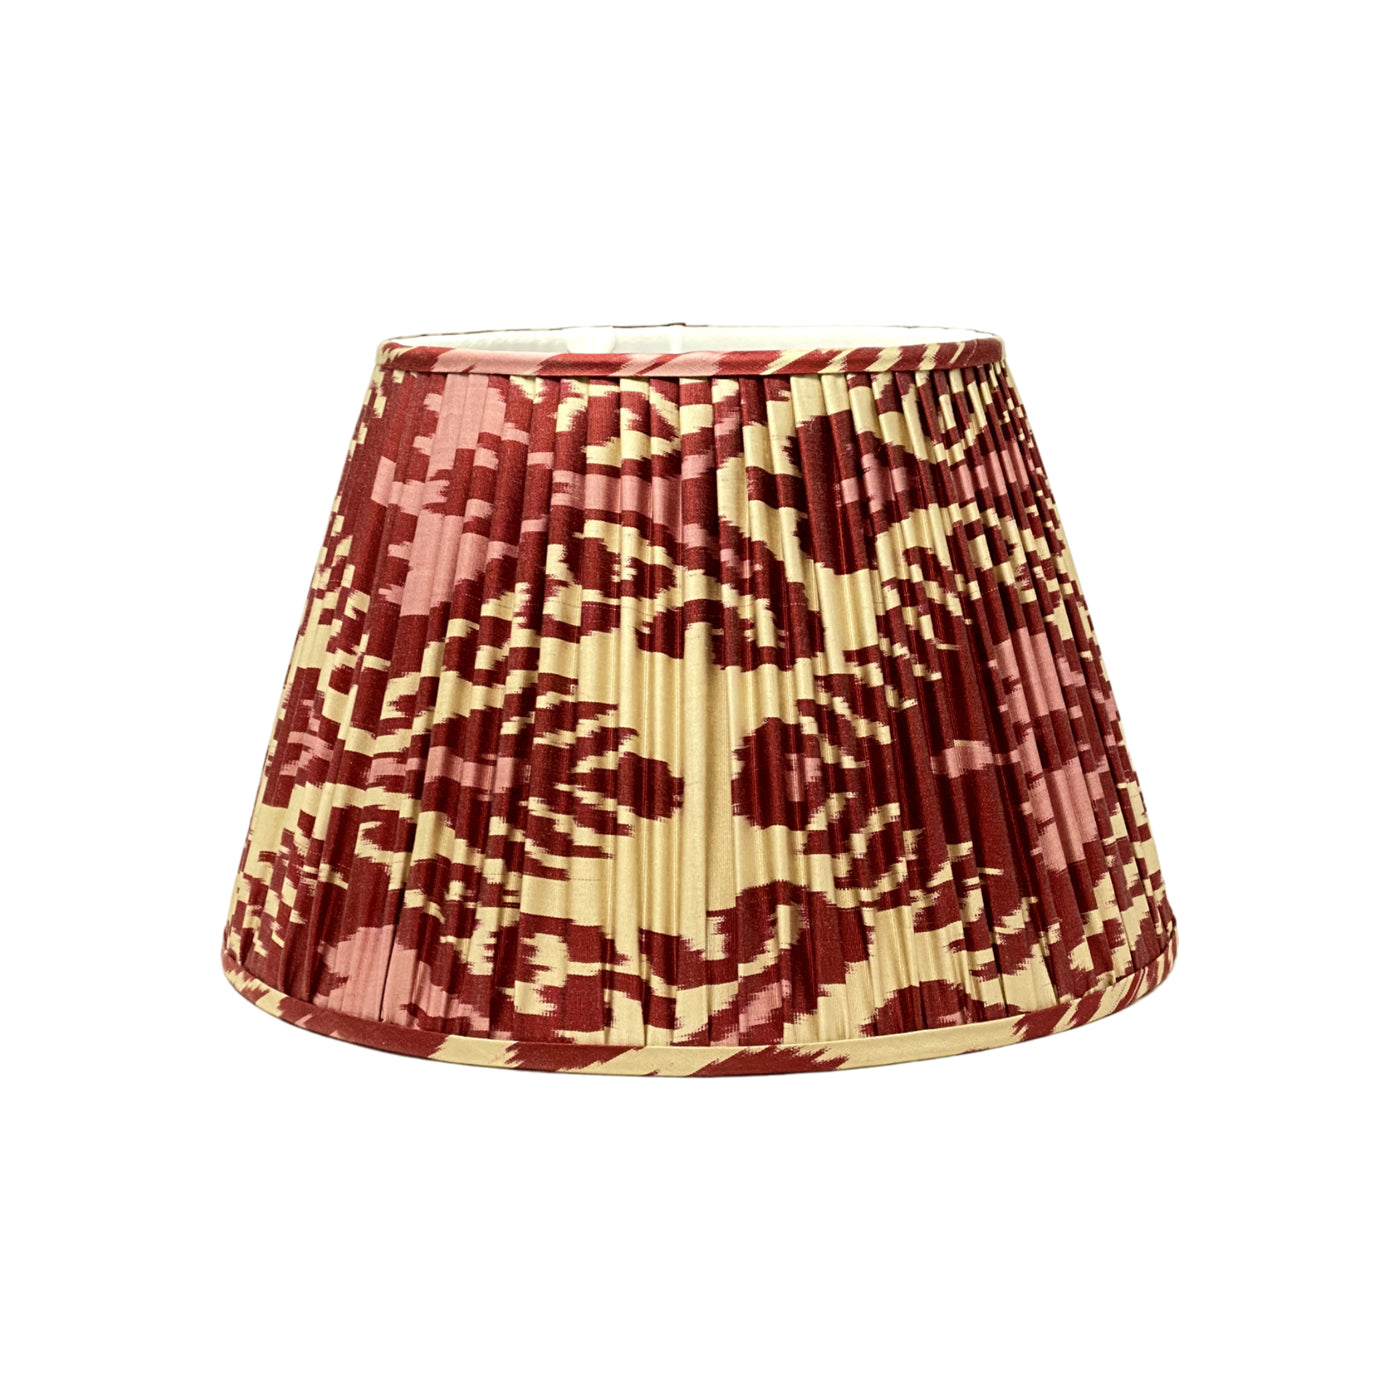 Pink and Red ikat lampshade